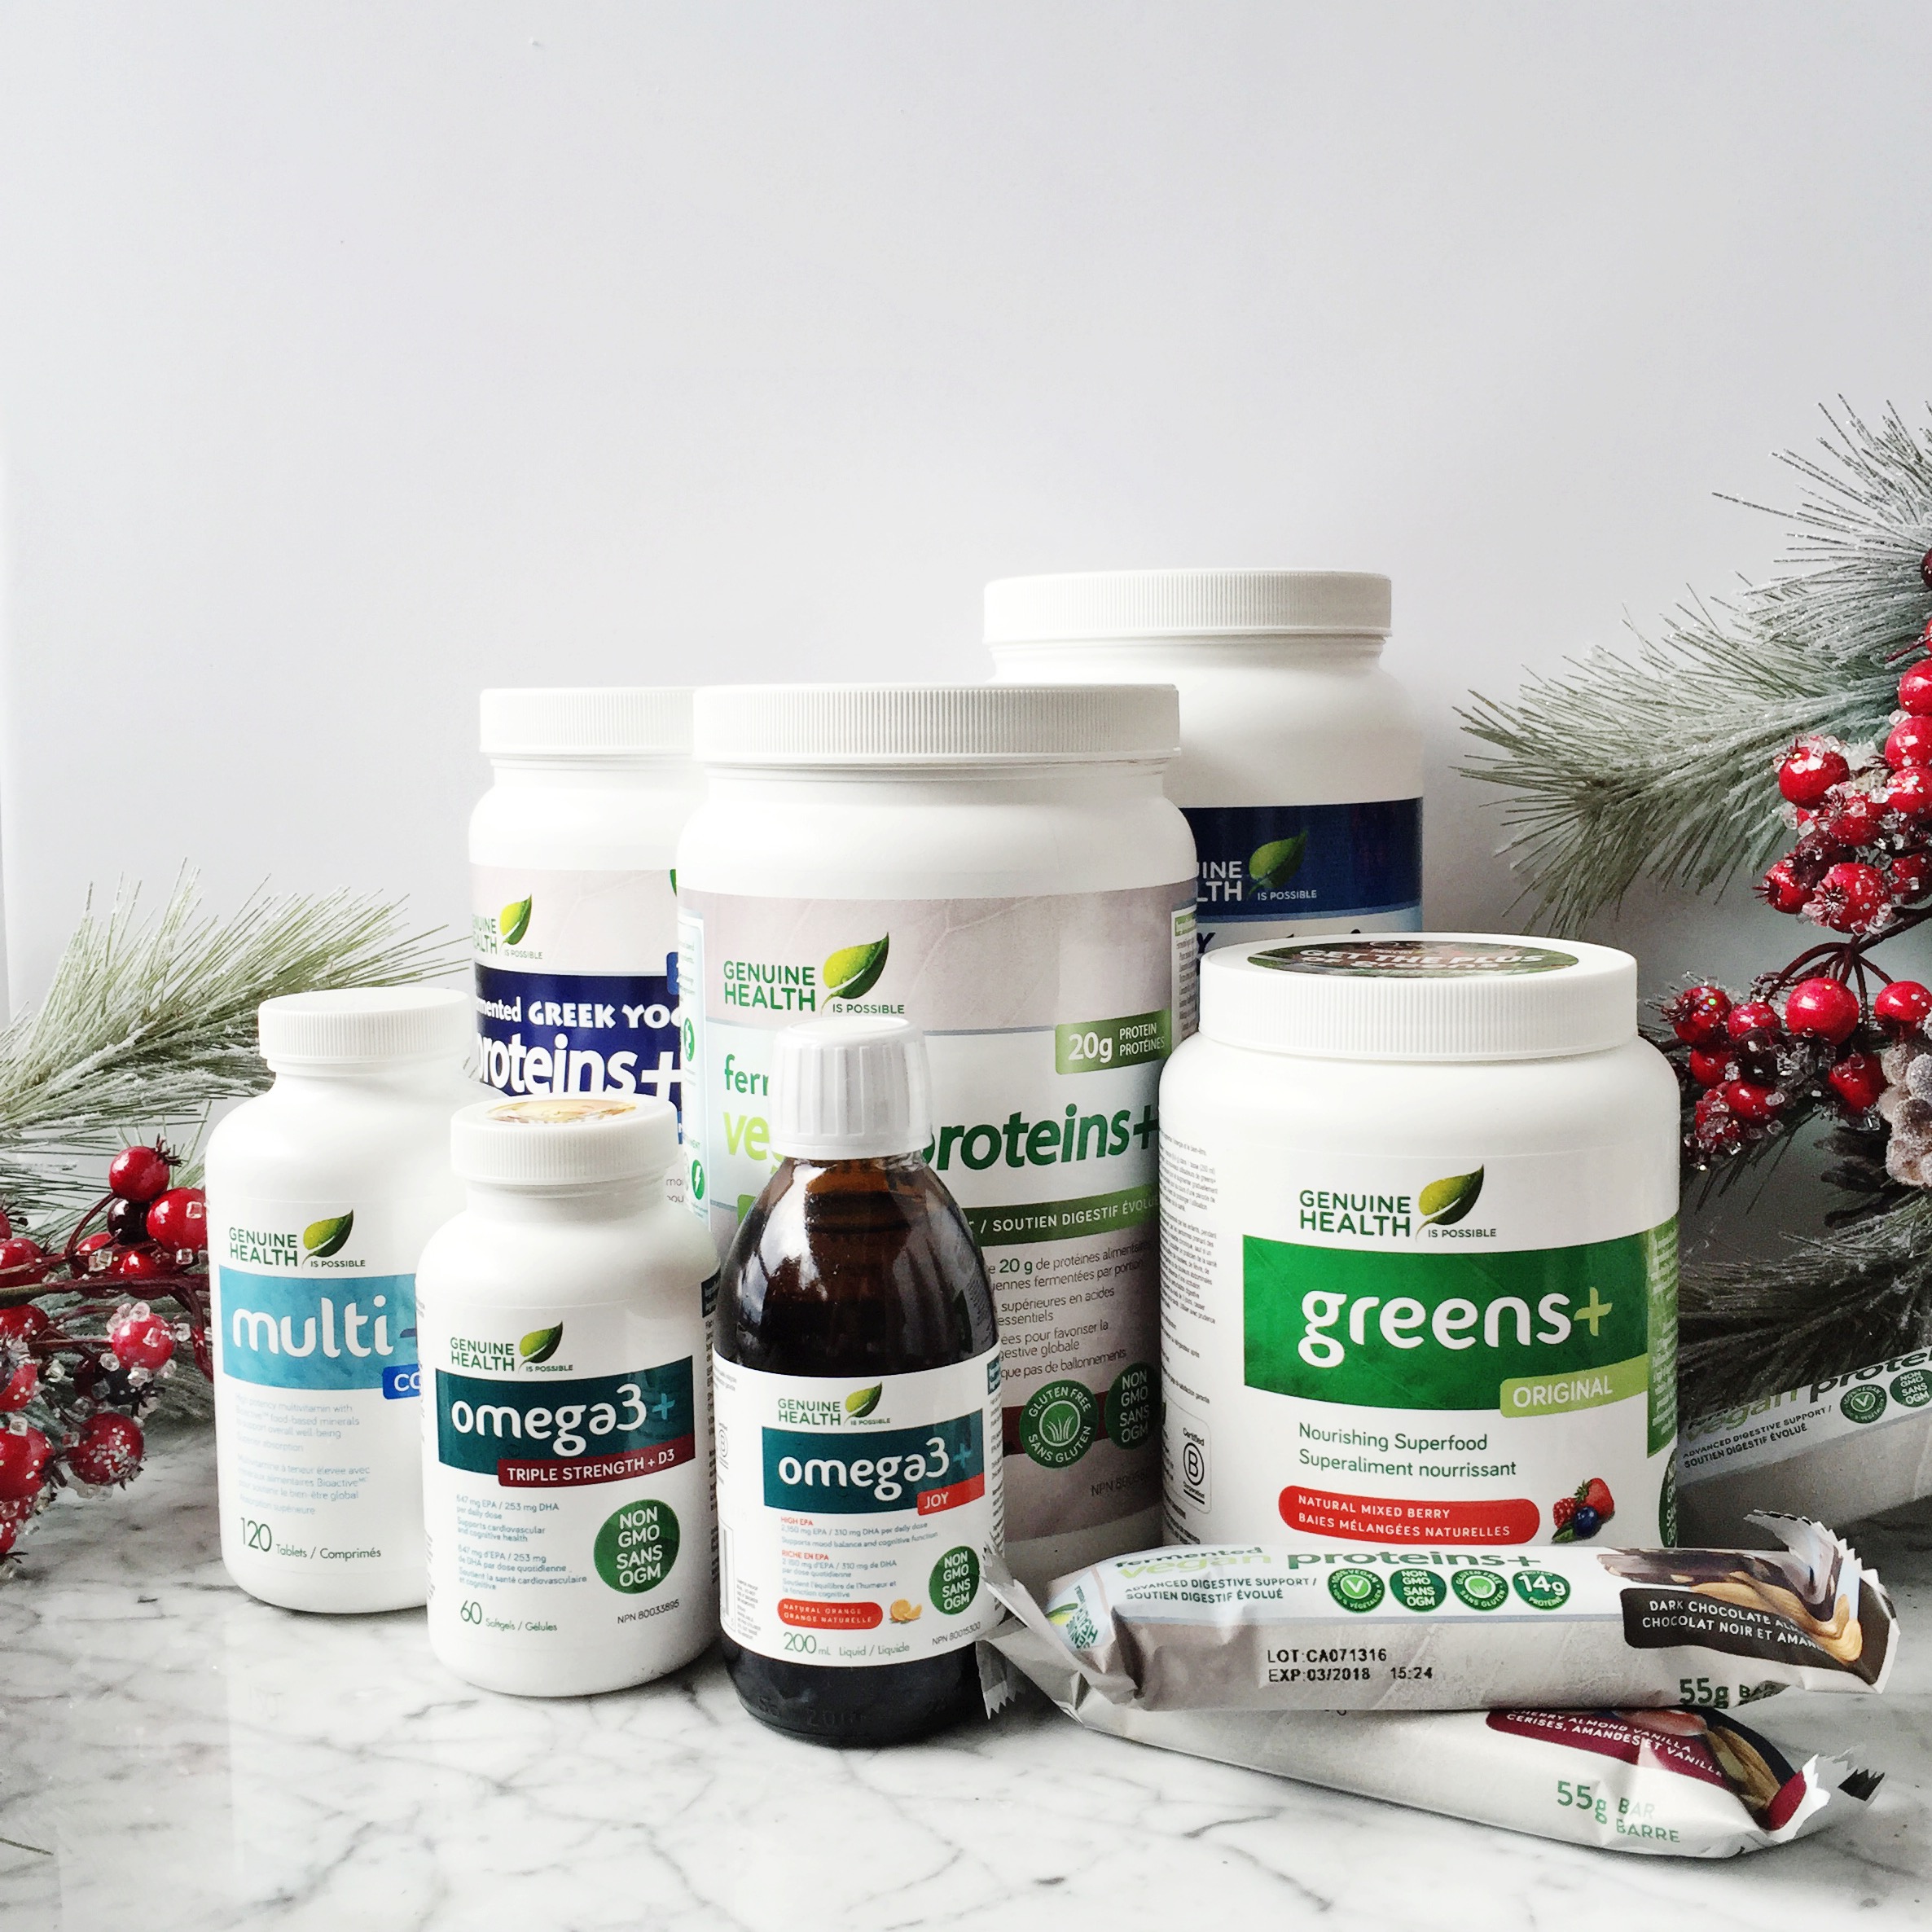 12 Days of Christmas Giveaway: Genuine Health